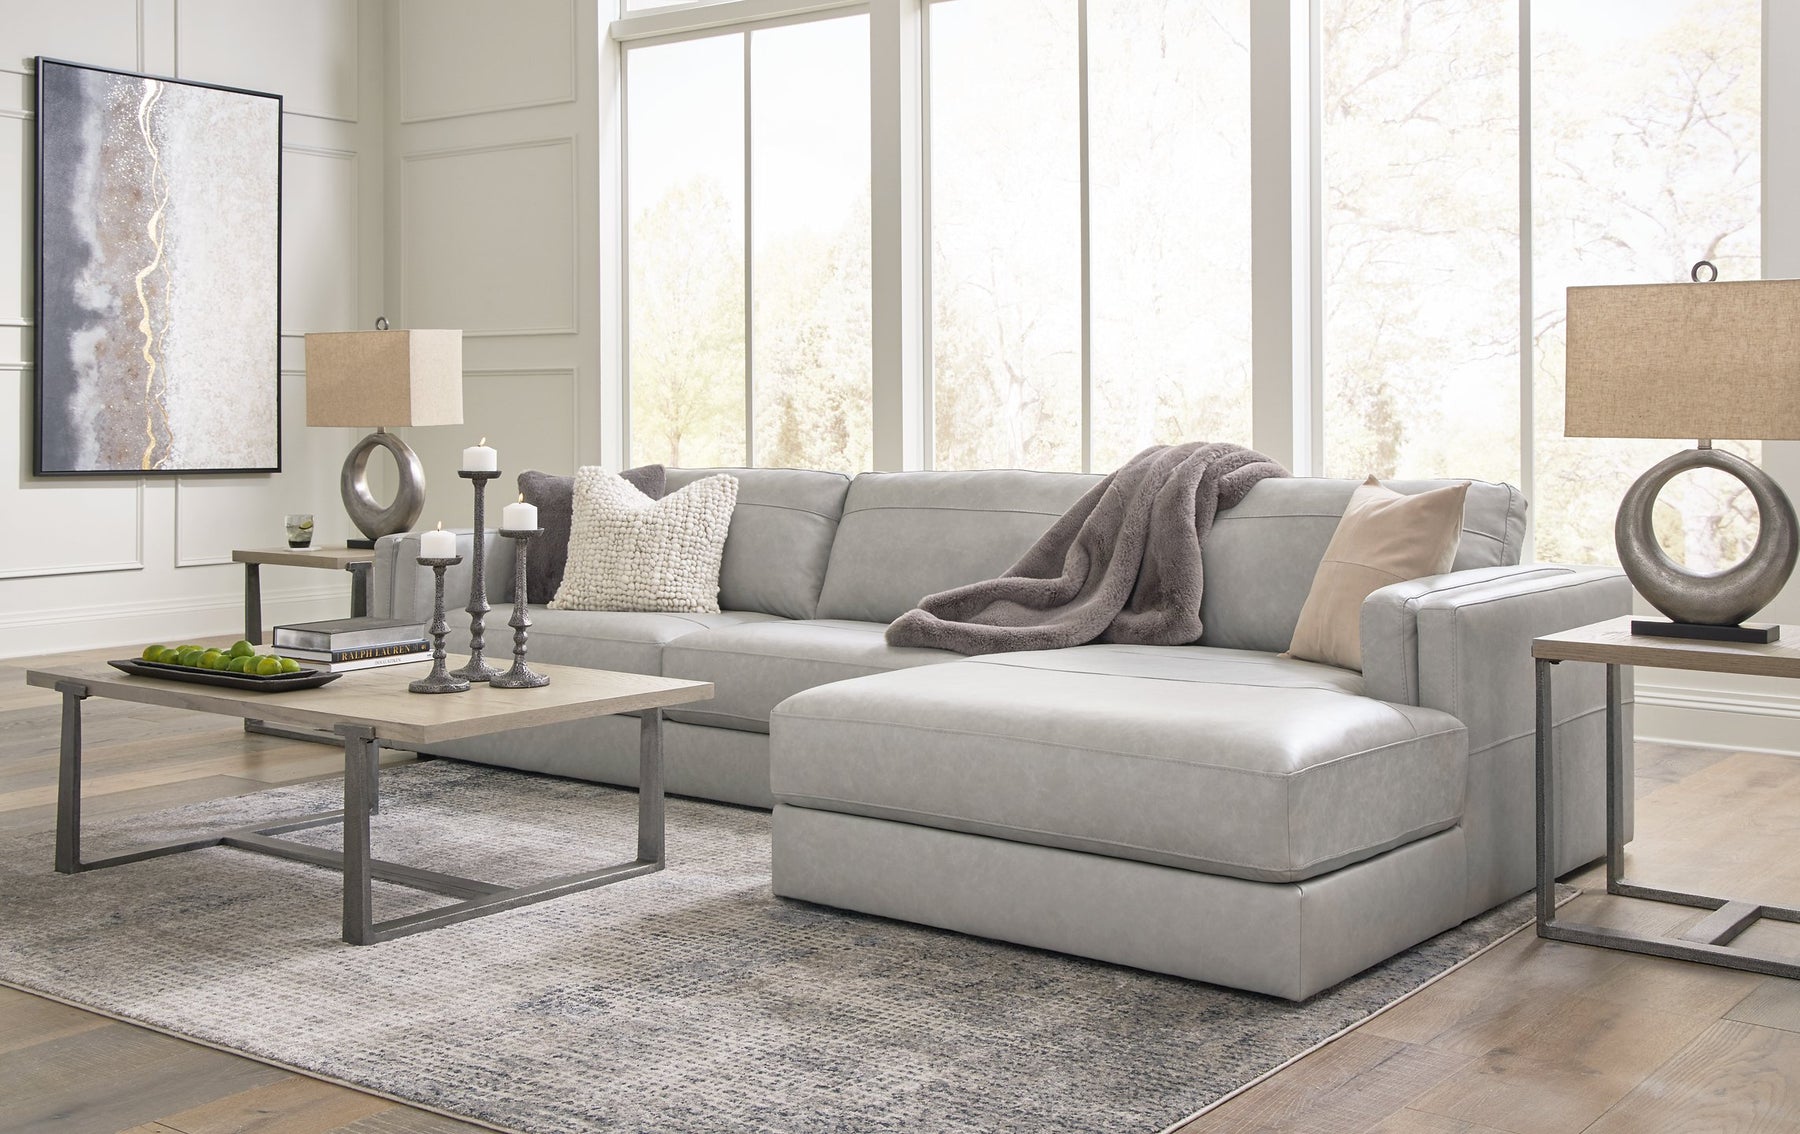 Amiata Sectional with Chaise Amiata Sectional with Chaise Half Price Furniture